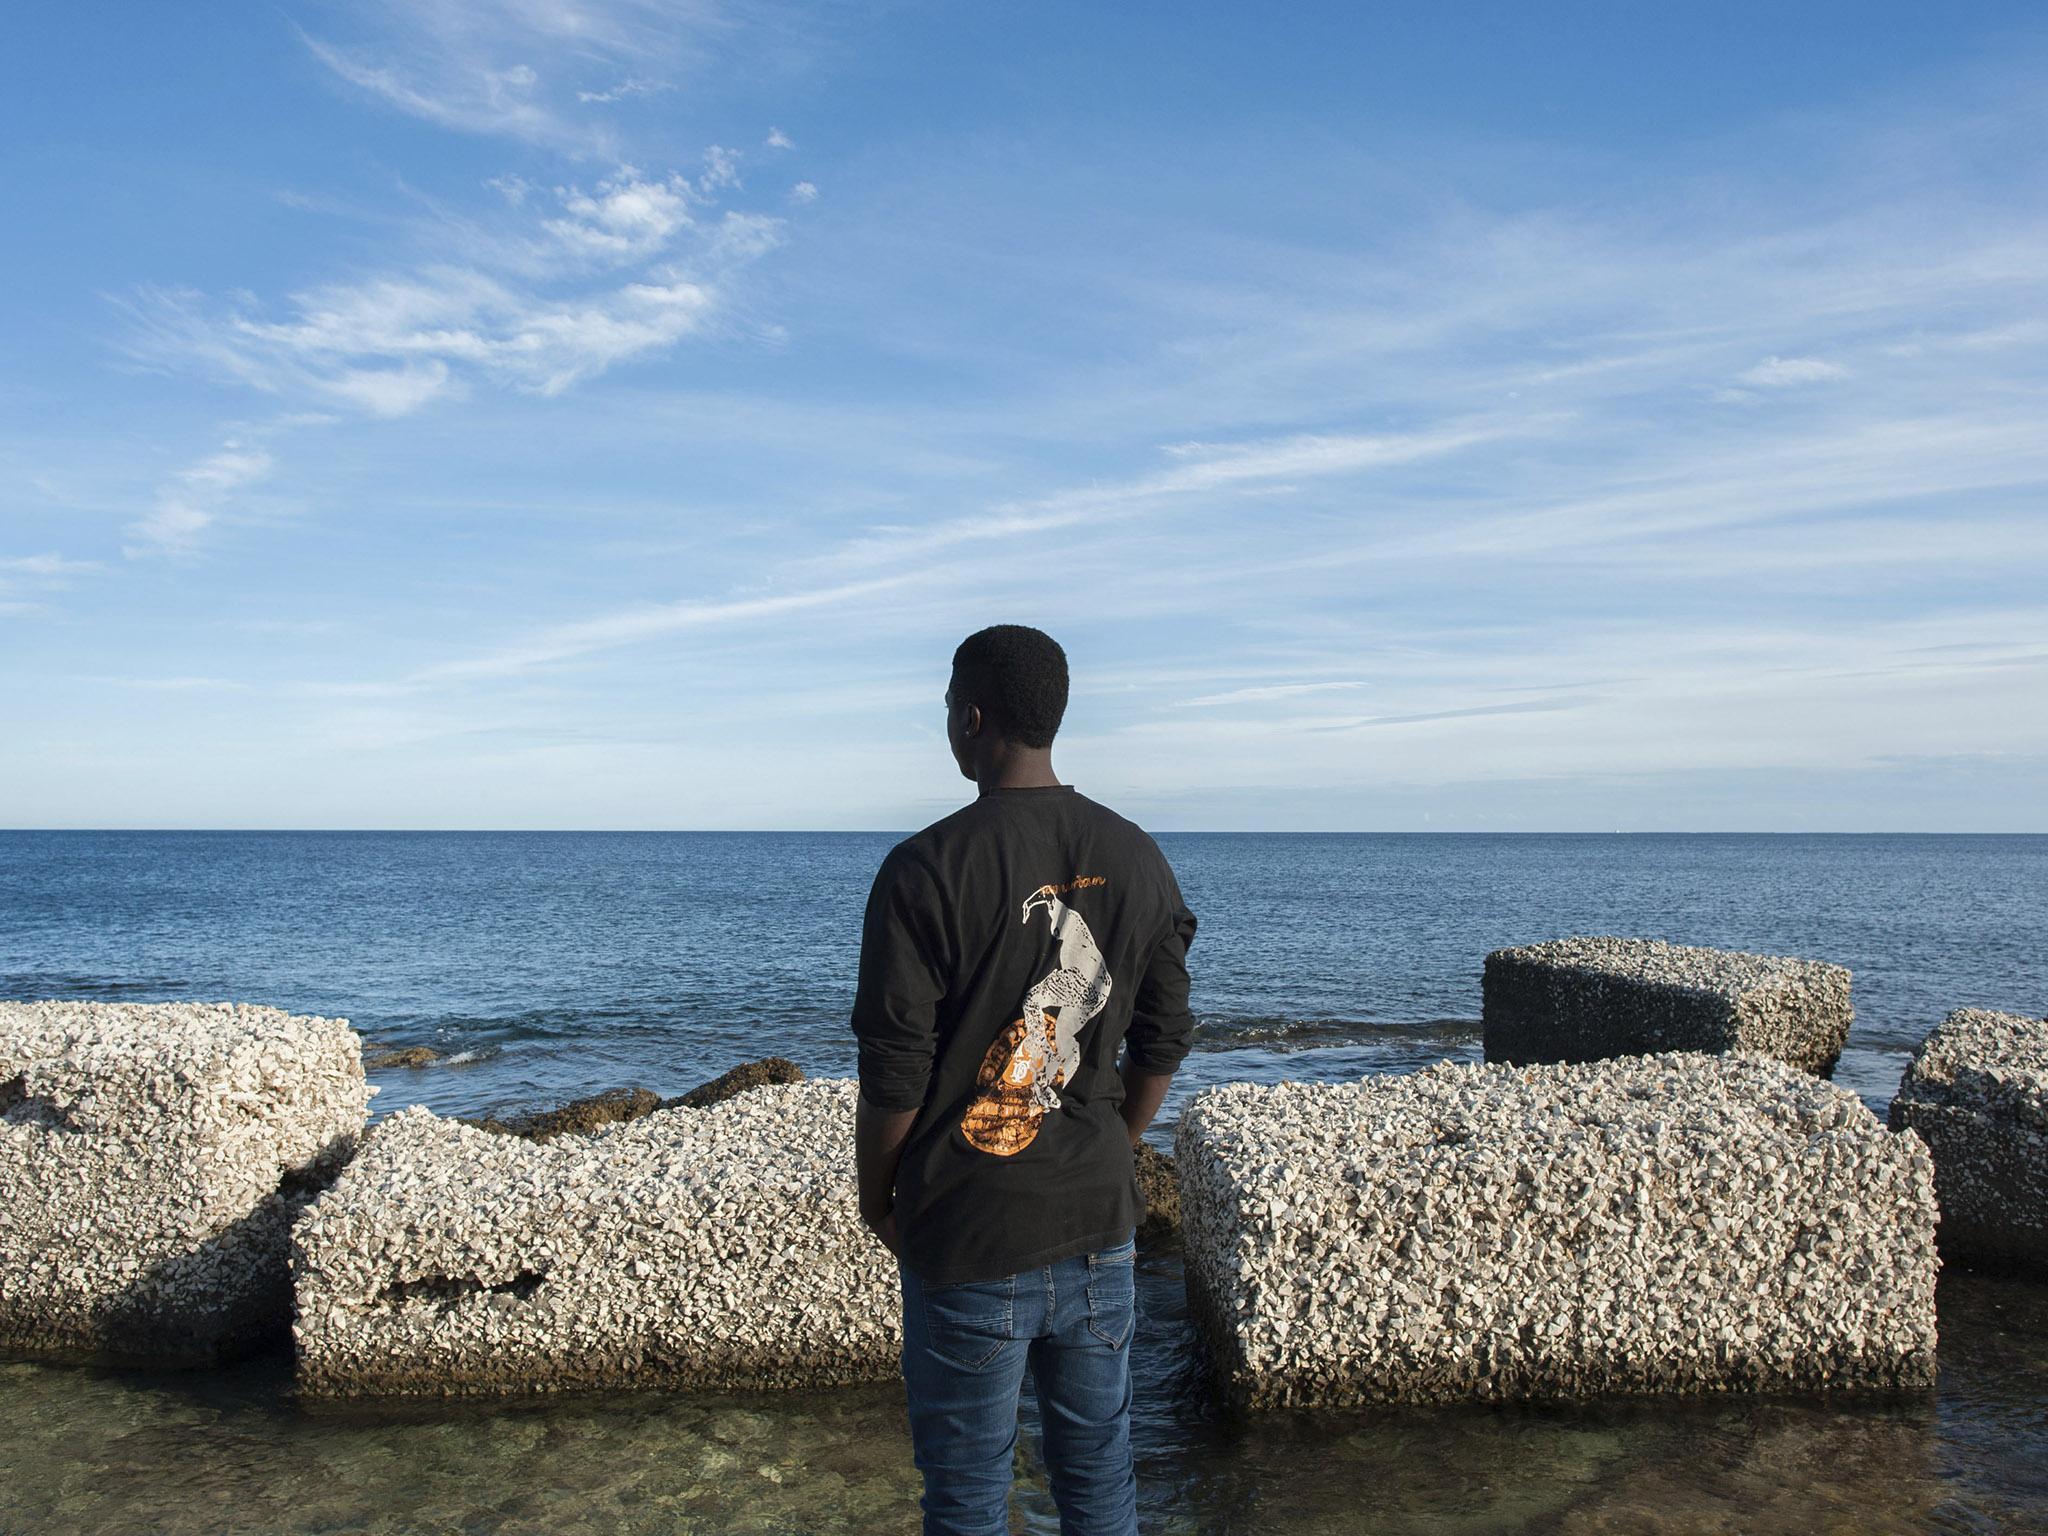 Samie watches the sea in Pachino, Sicily. The Togolese migrant is struggling to find out what happened to his fiancée